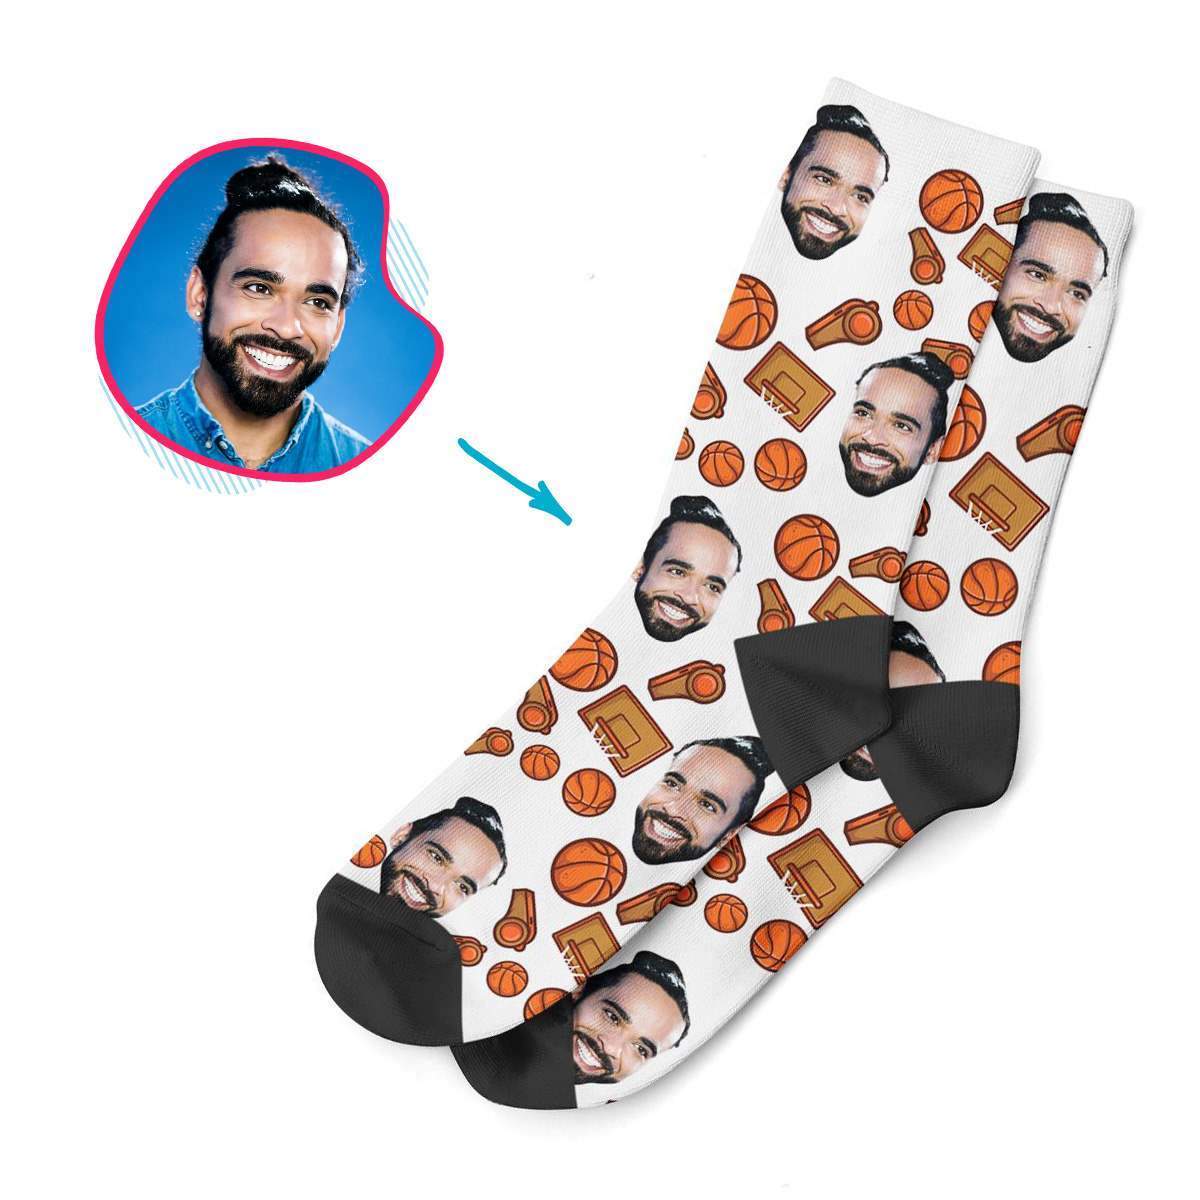 white Basketball socks personalized with photo of face printed on them